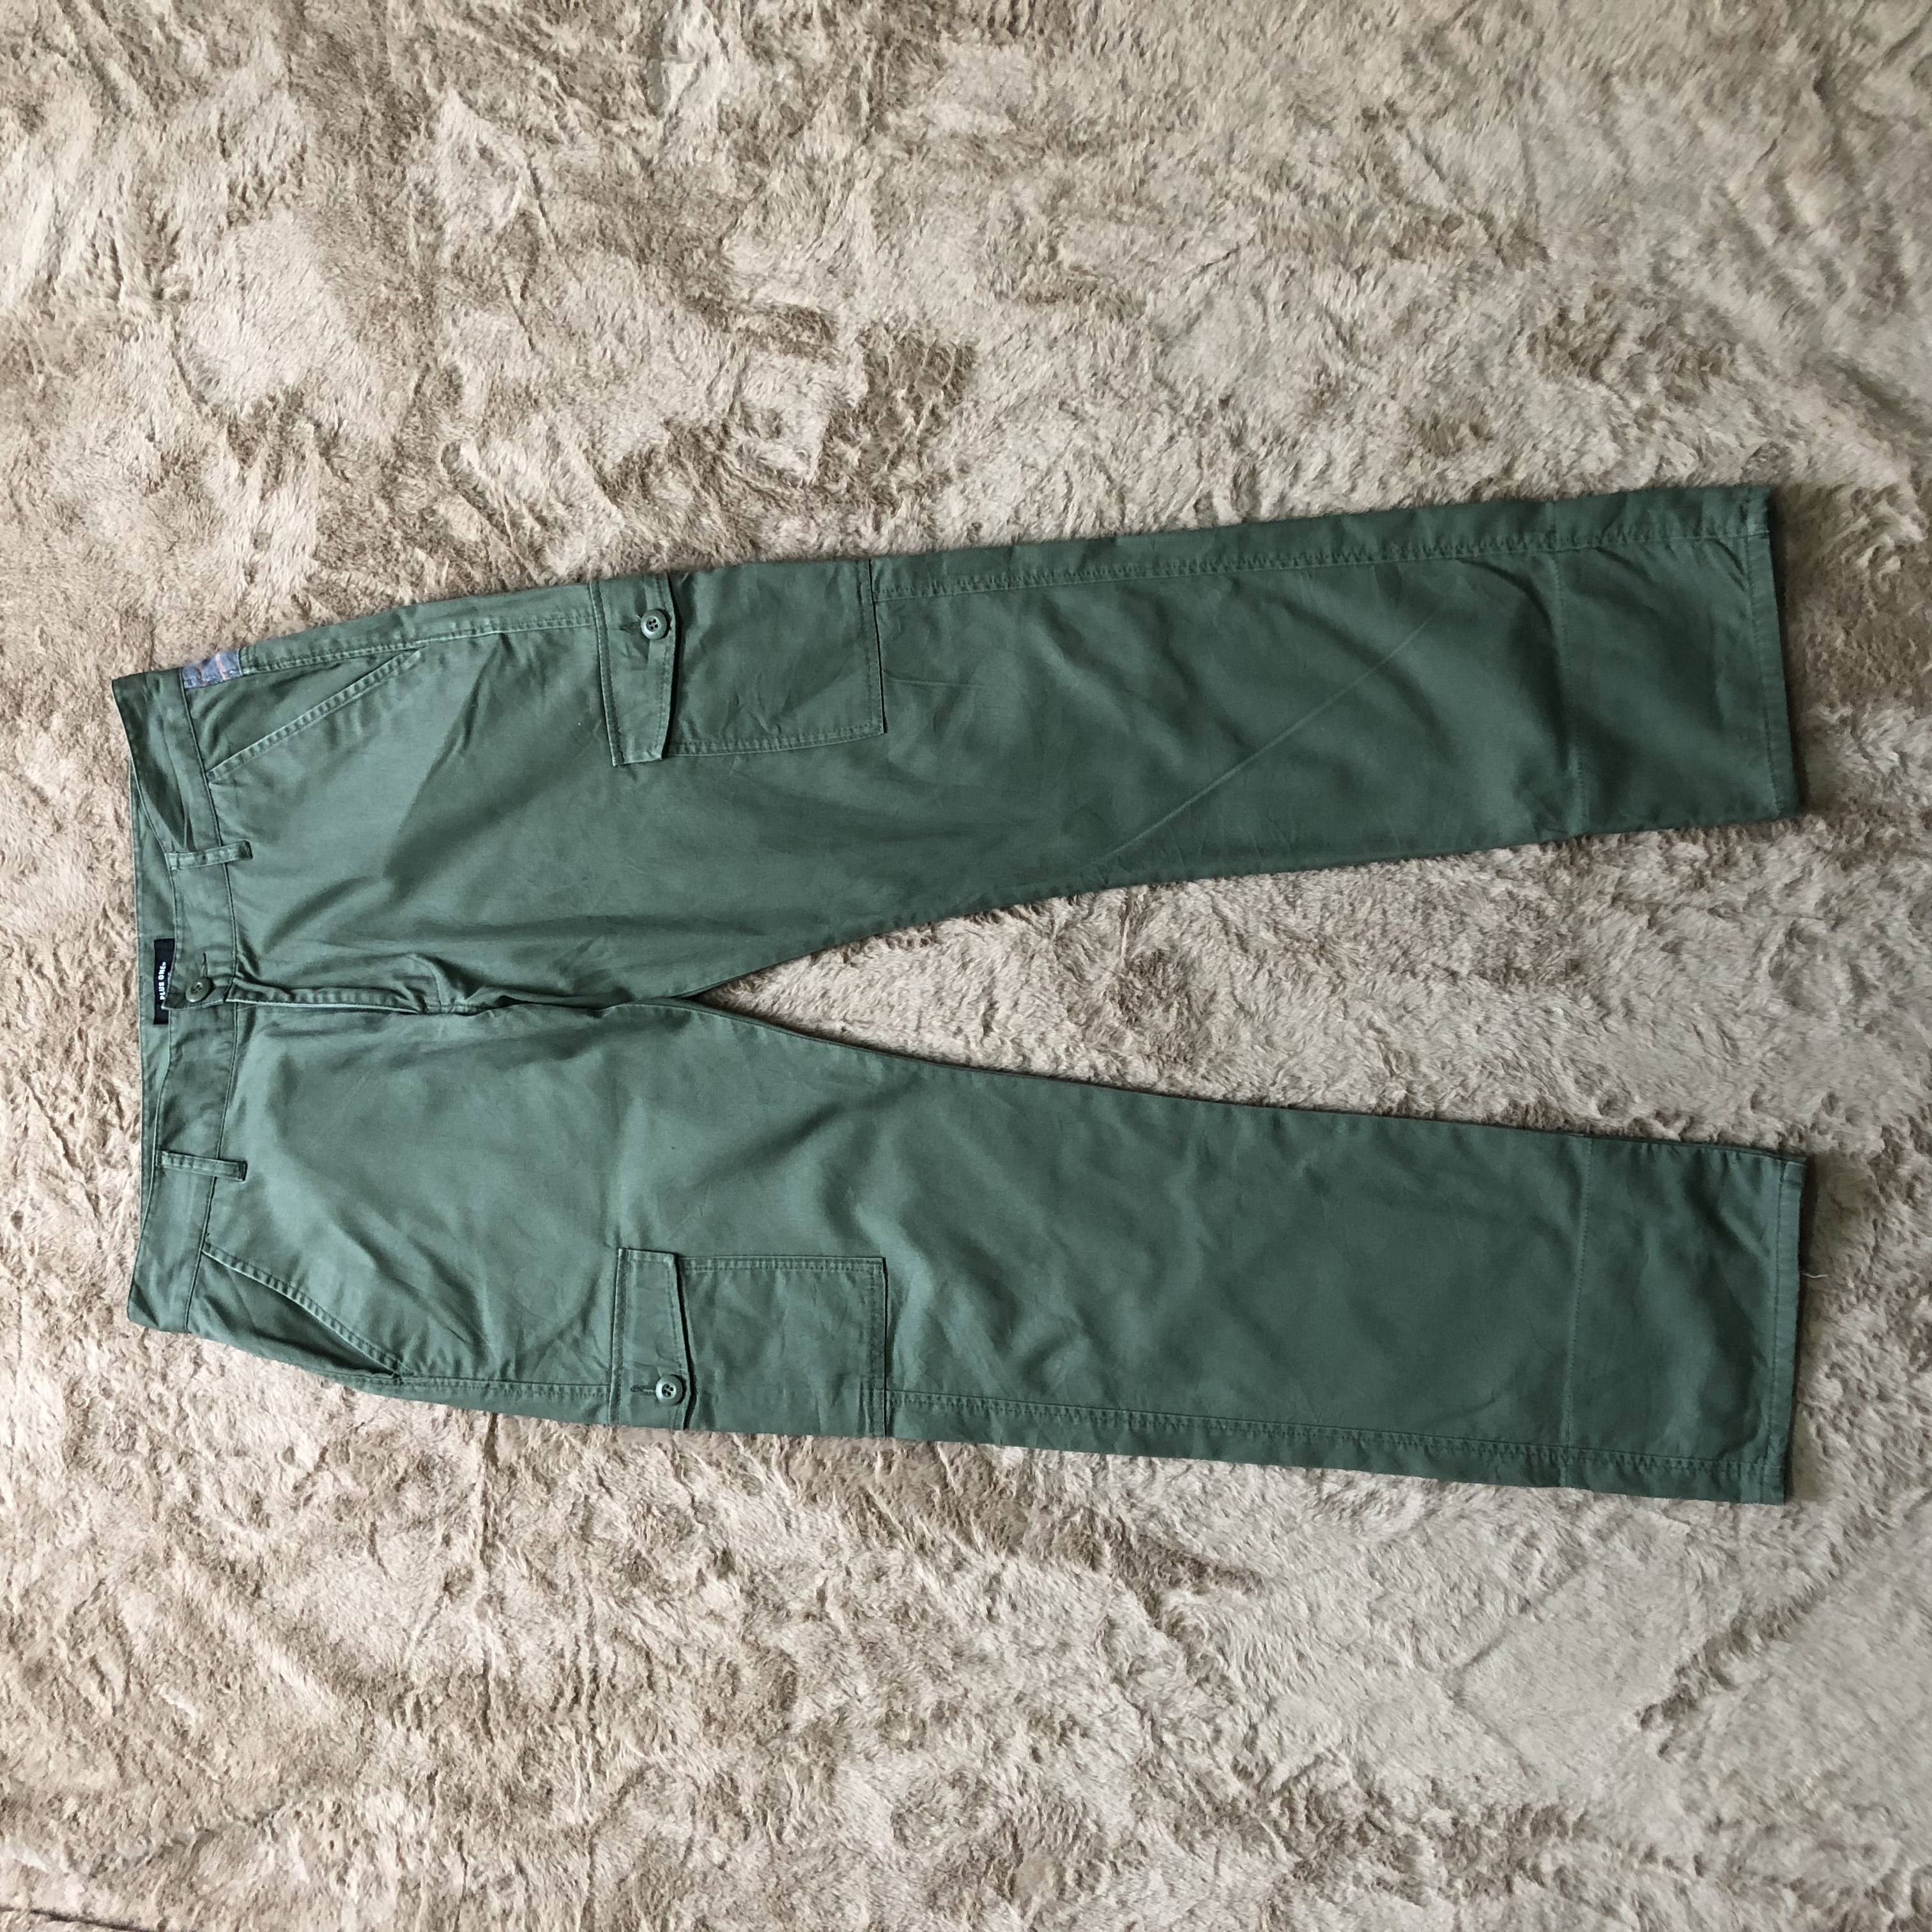 Japanese Brand - Plus One Military Army Style Cargo Pants 6 Pocket #4289-149 - 1